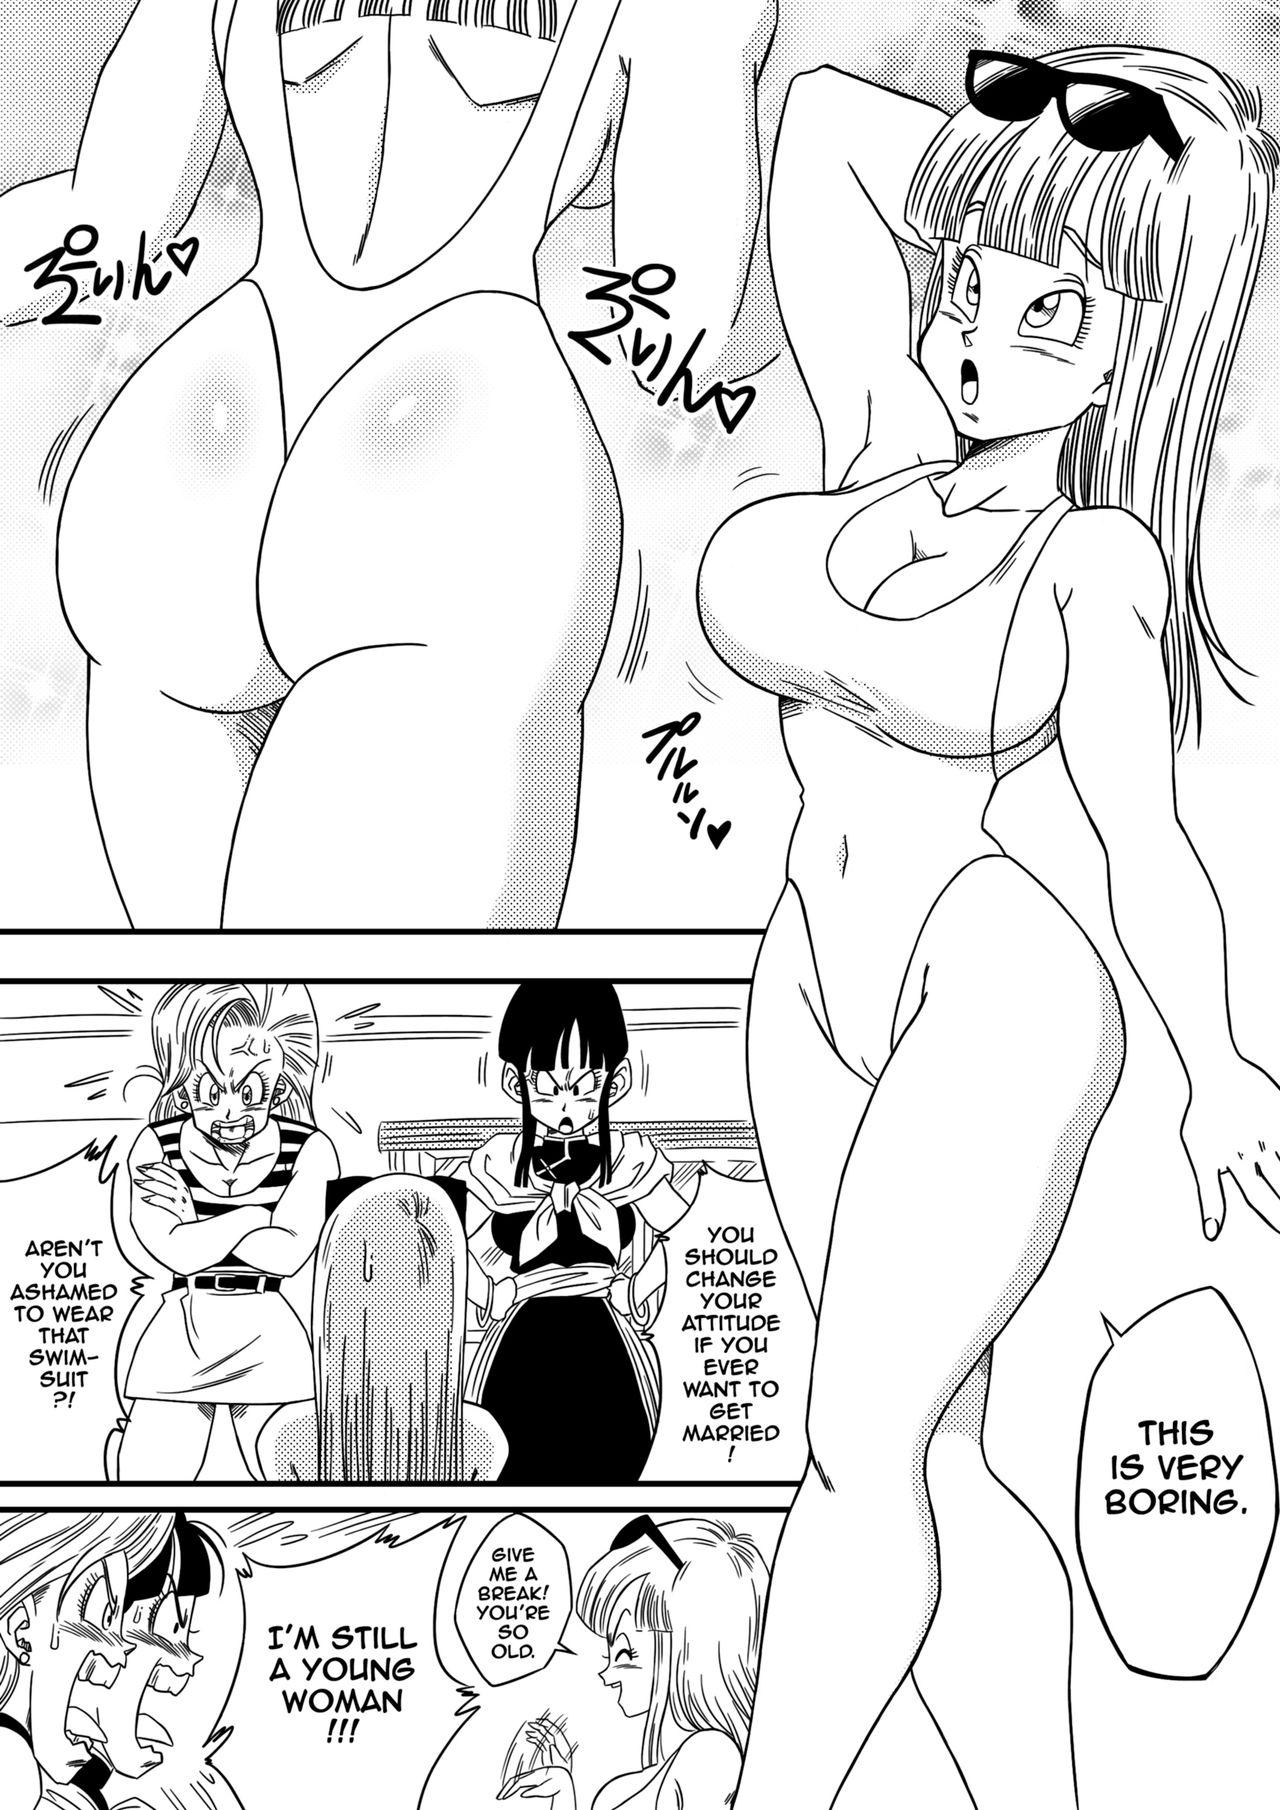 Climax BITCH GIRLFRIEND - Dragon ball z Indoor - Page 4